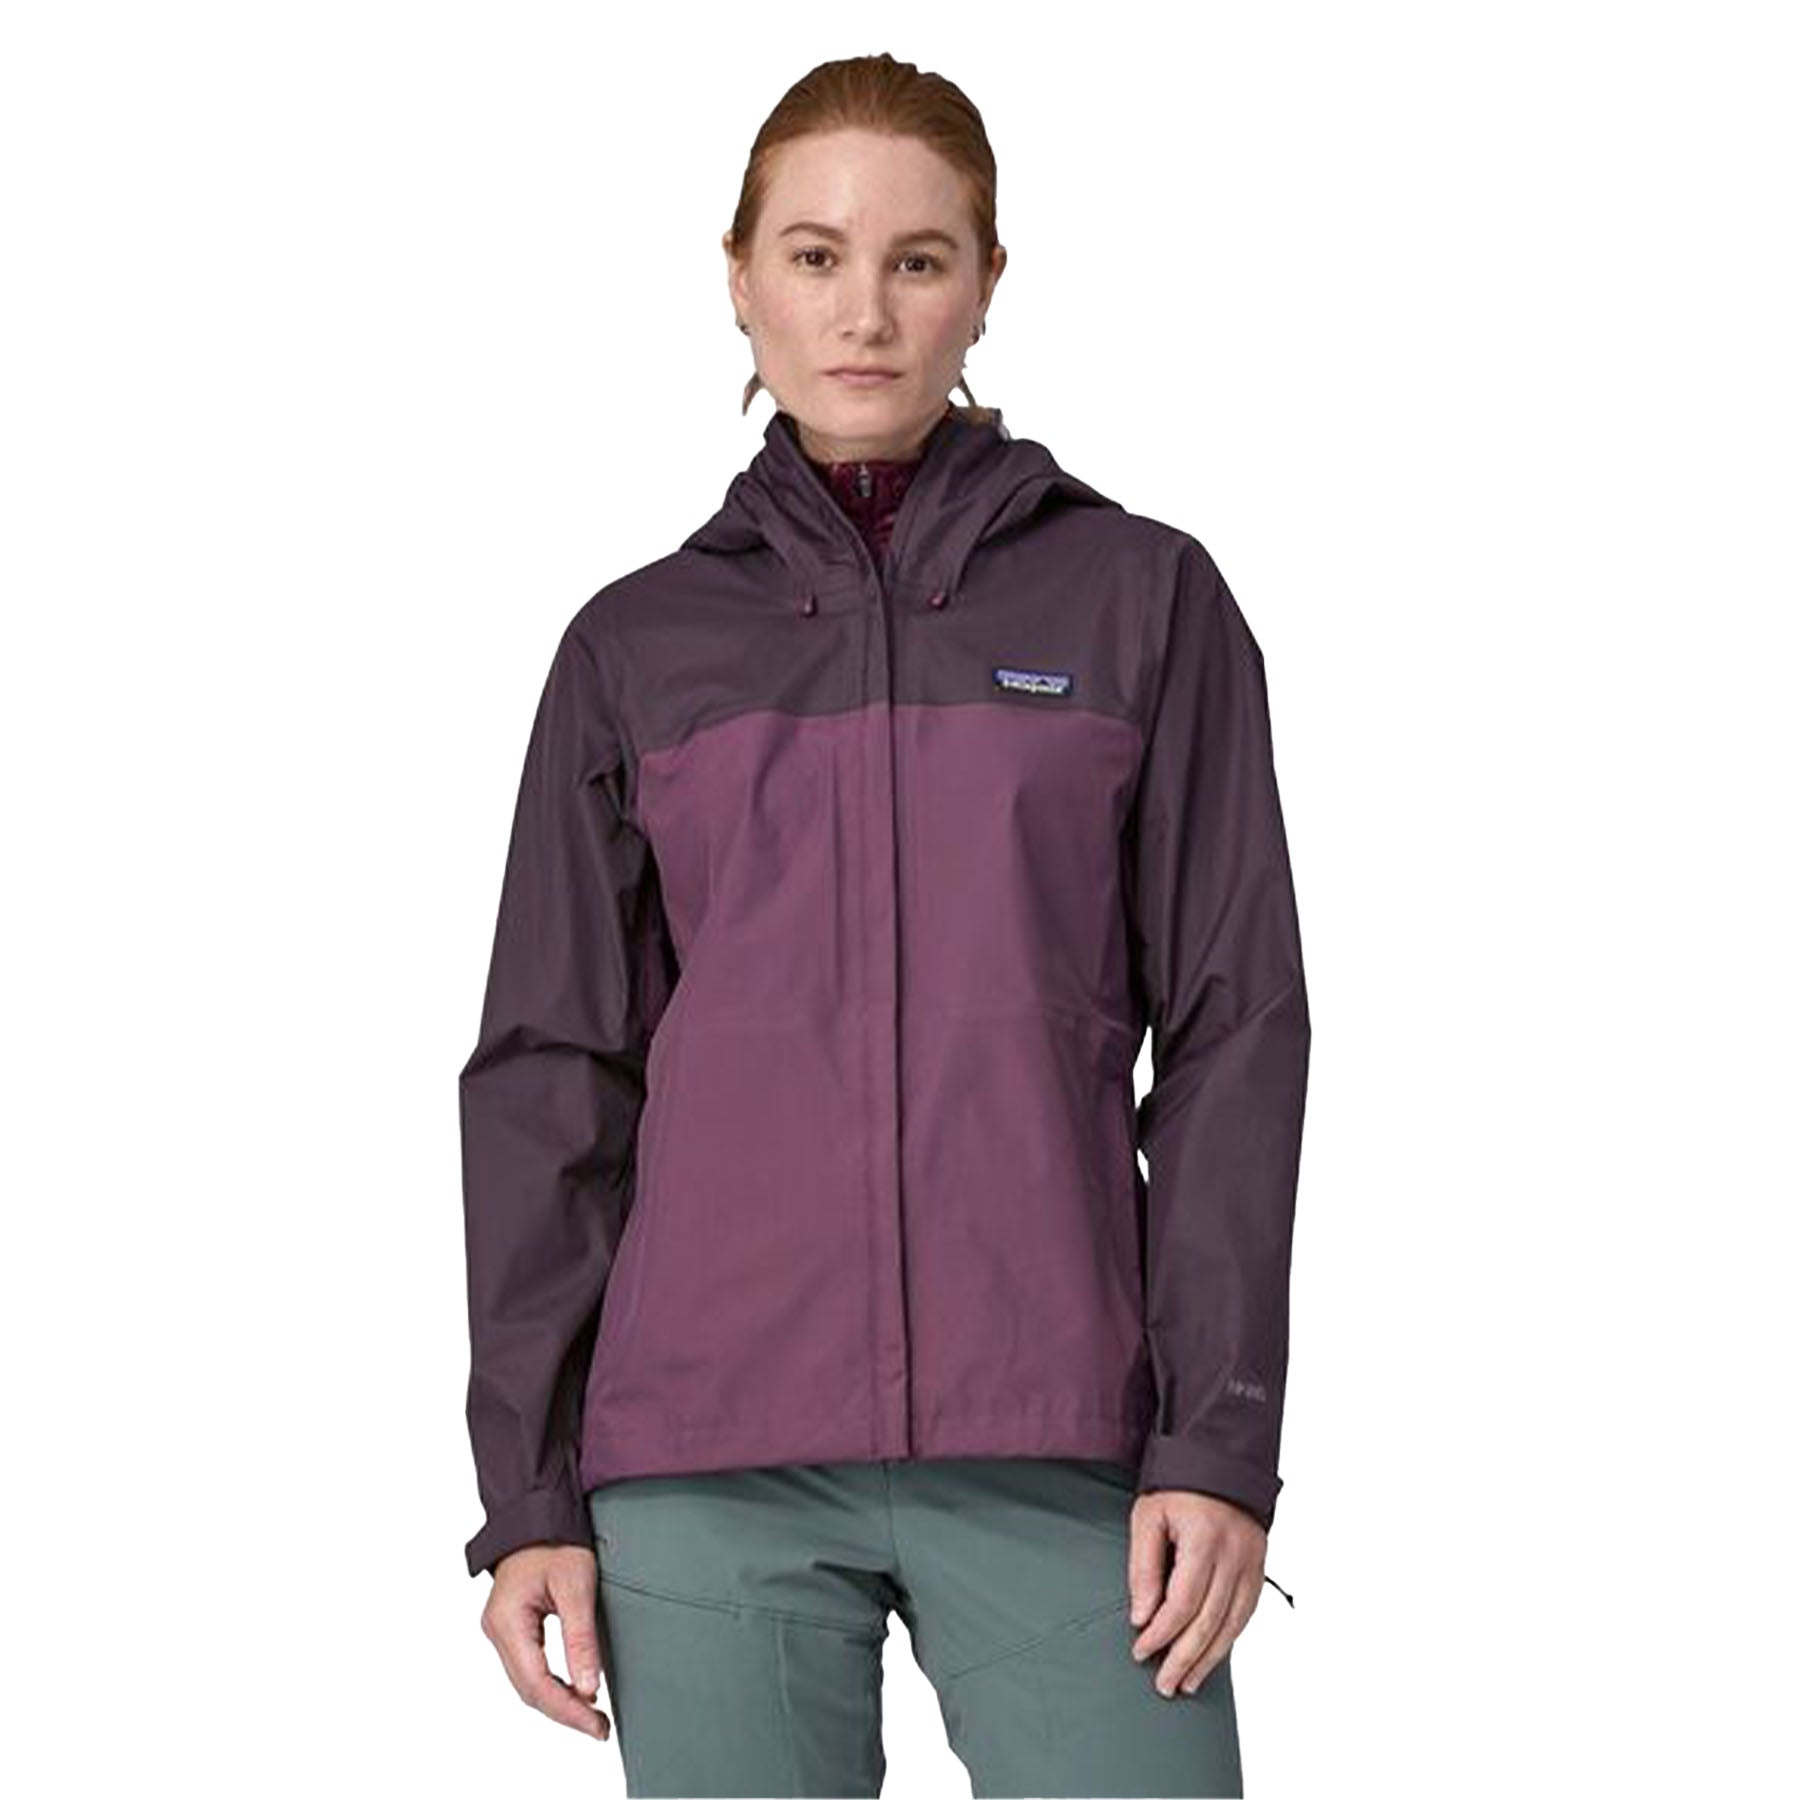 Buy the Patagonia Torrentshell Navy Blue Jacket Women's Size L